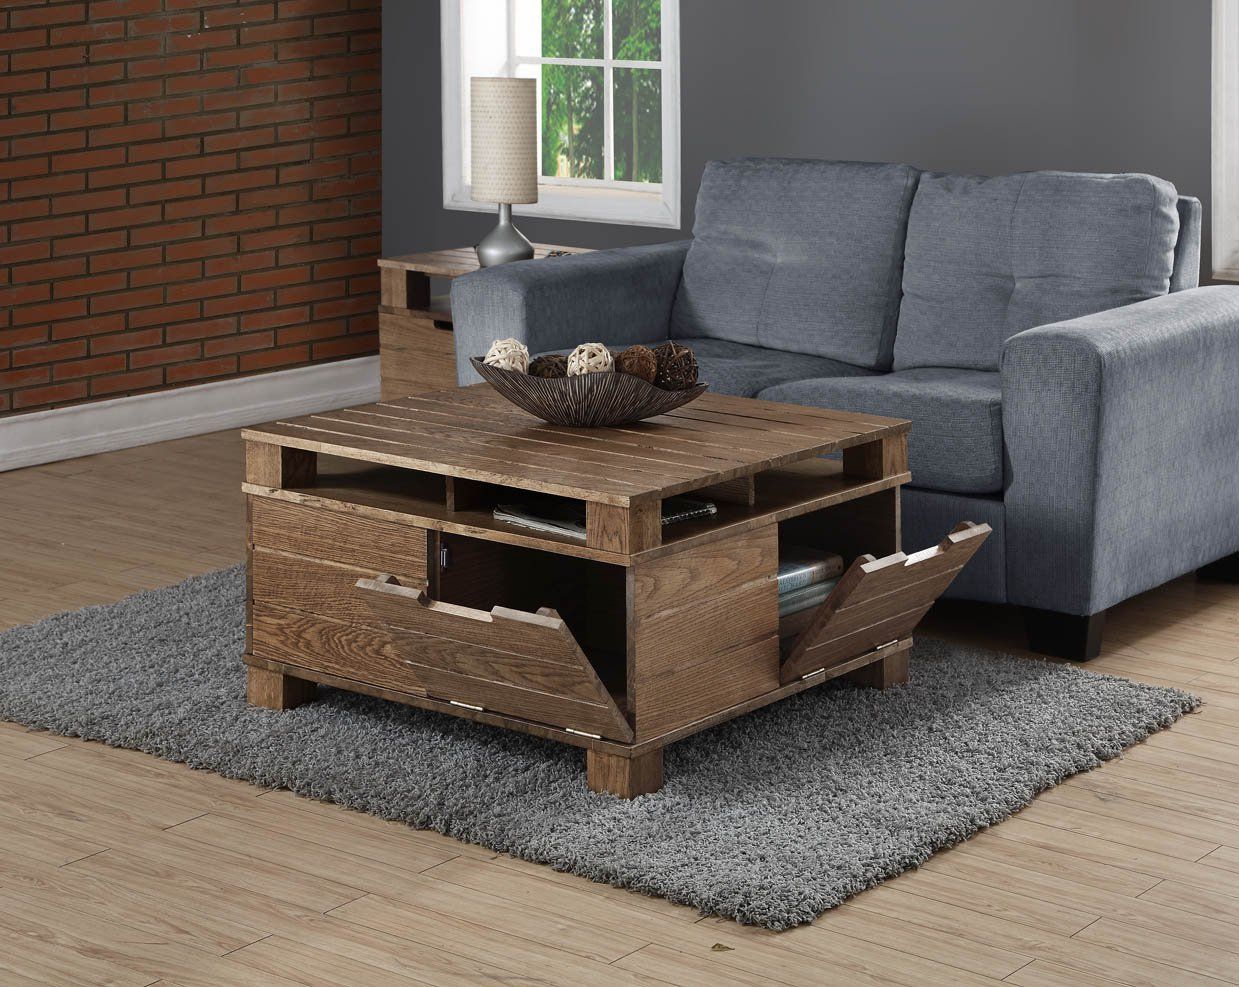 Jual Rustic Oak Solid Wood Coffee Table At Barnitts Online With Wood Coffee Tables (View 5 of 15)